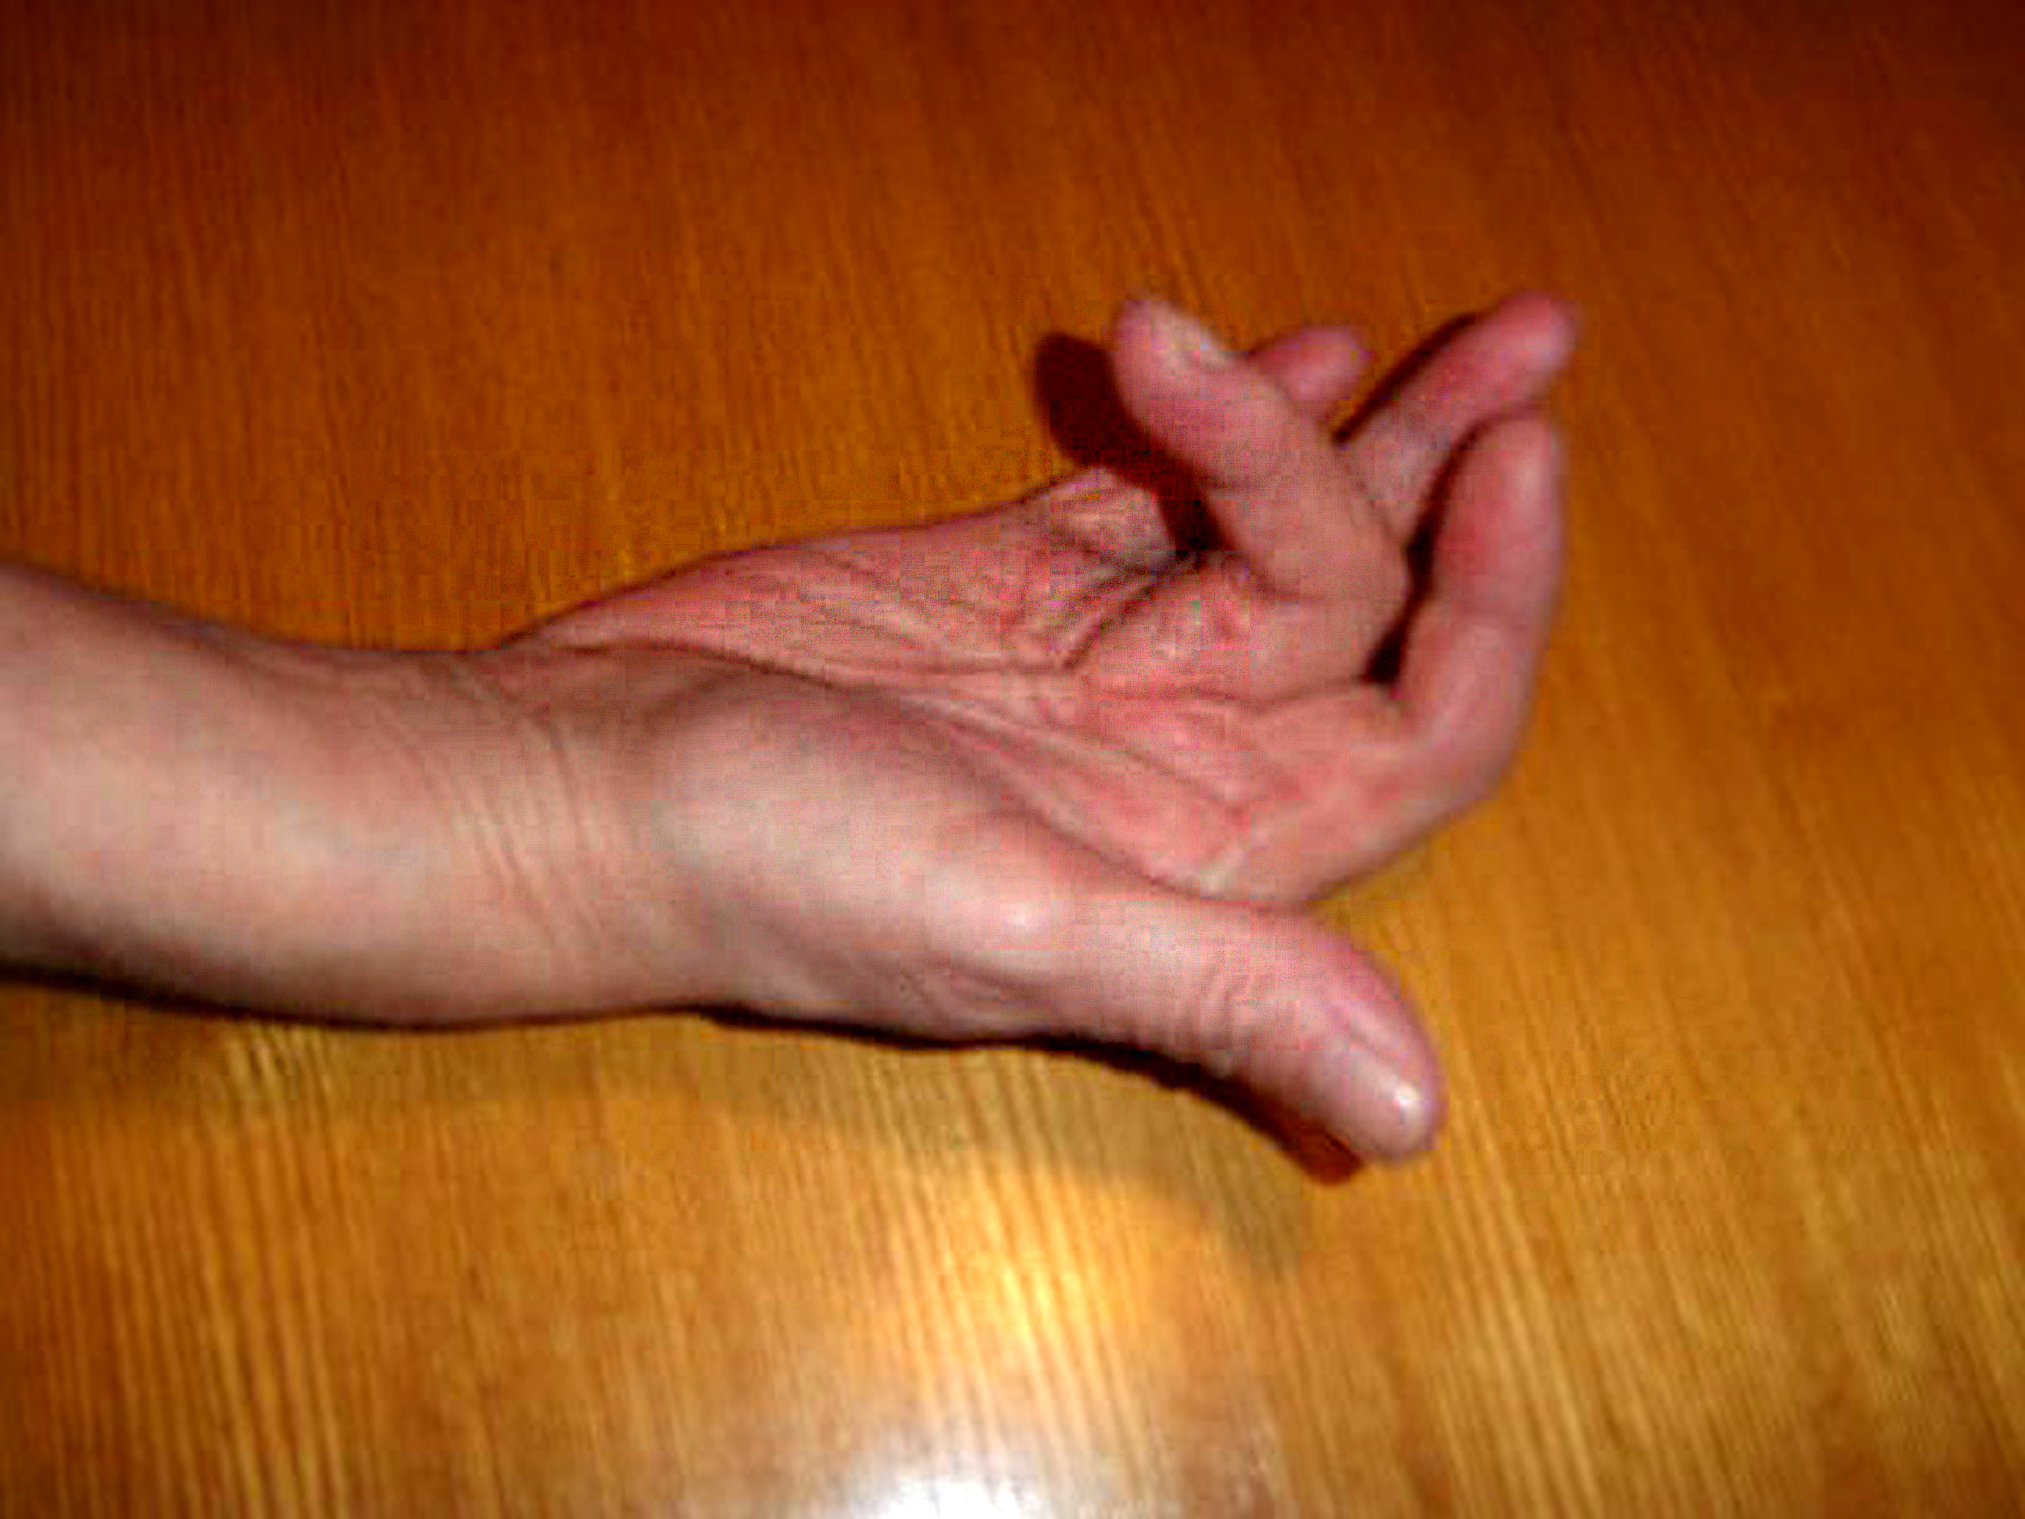 Dupuytren's contracture. Adapted from Wikimedia Commons.[4]